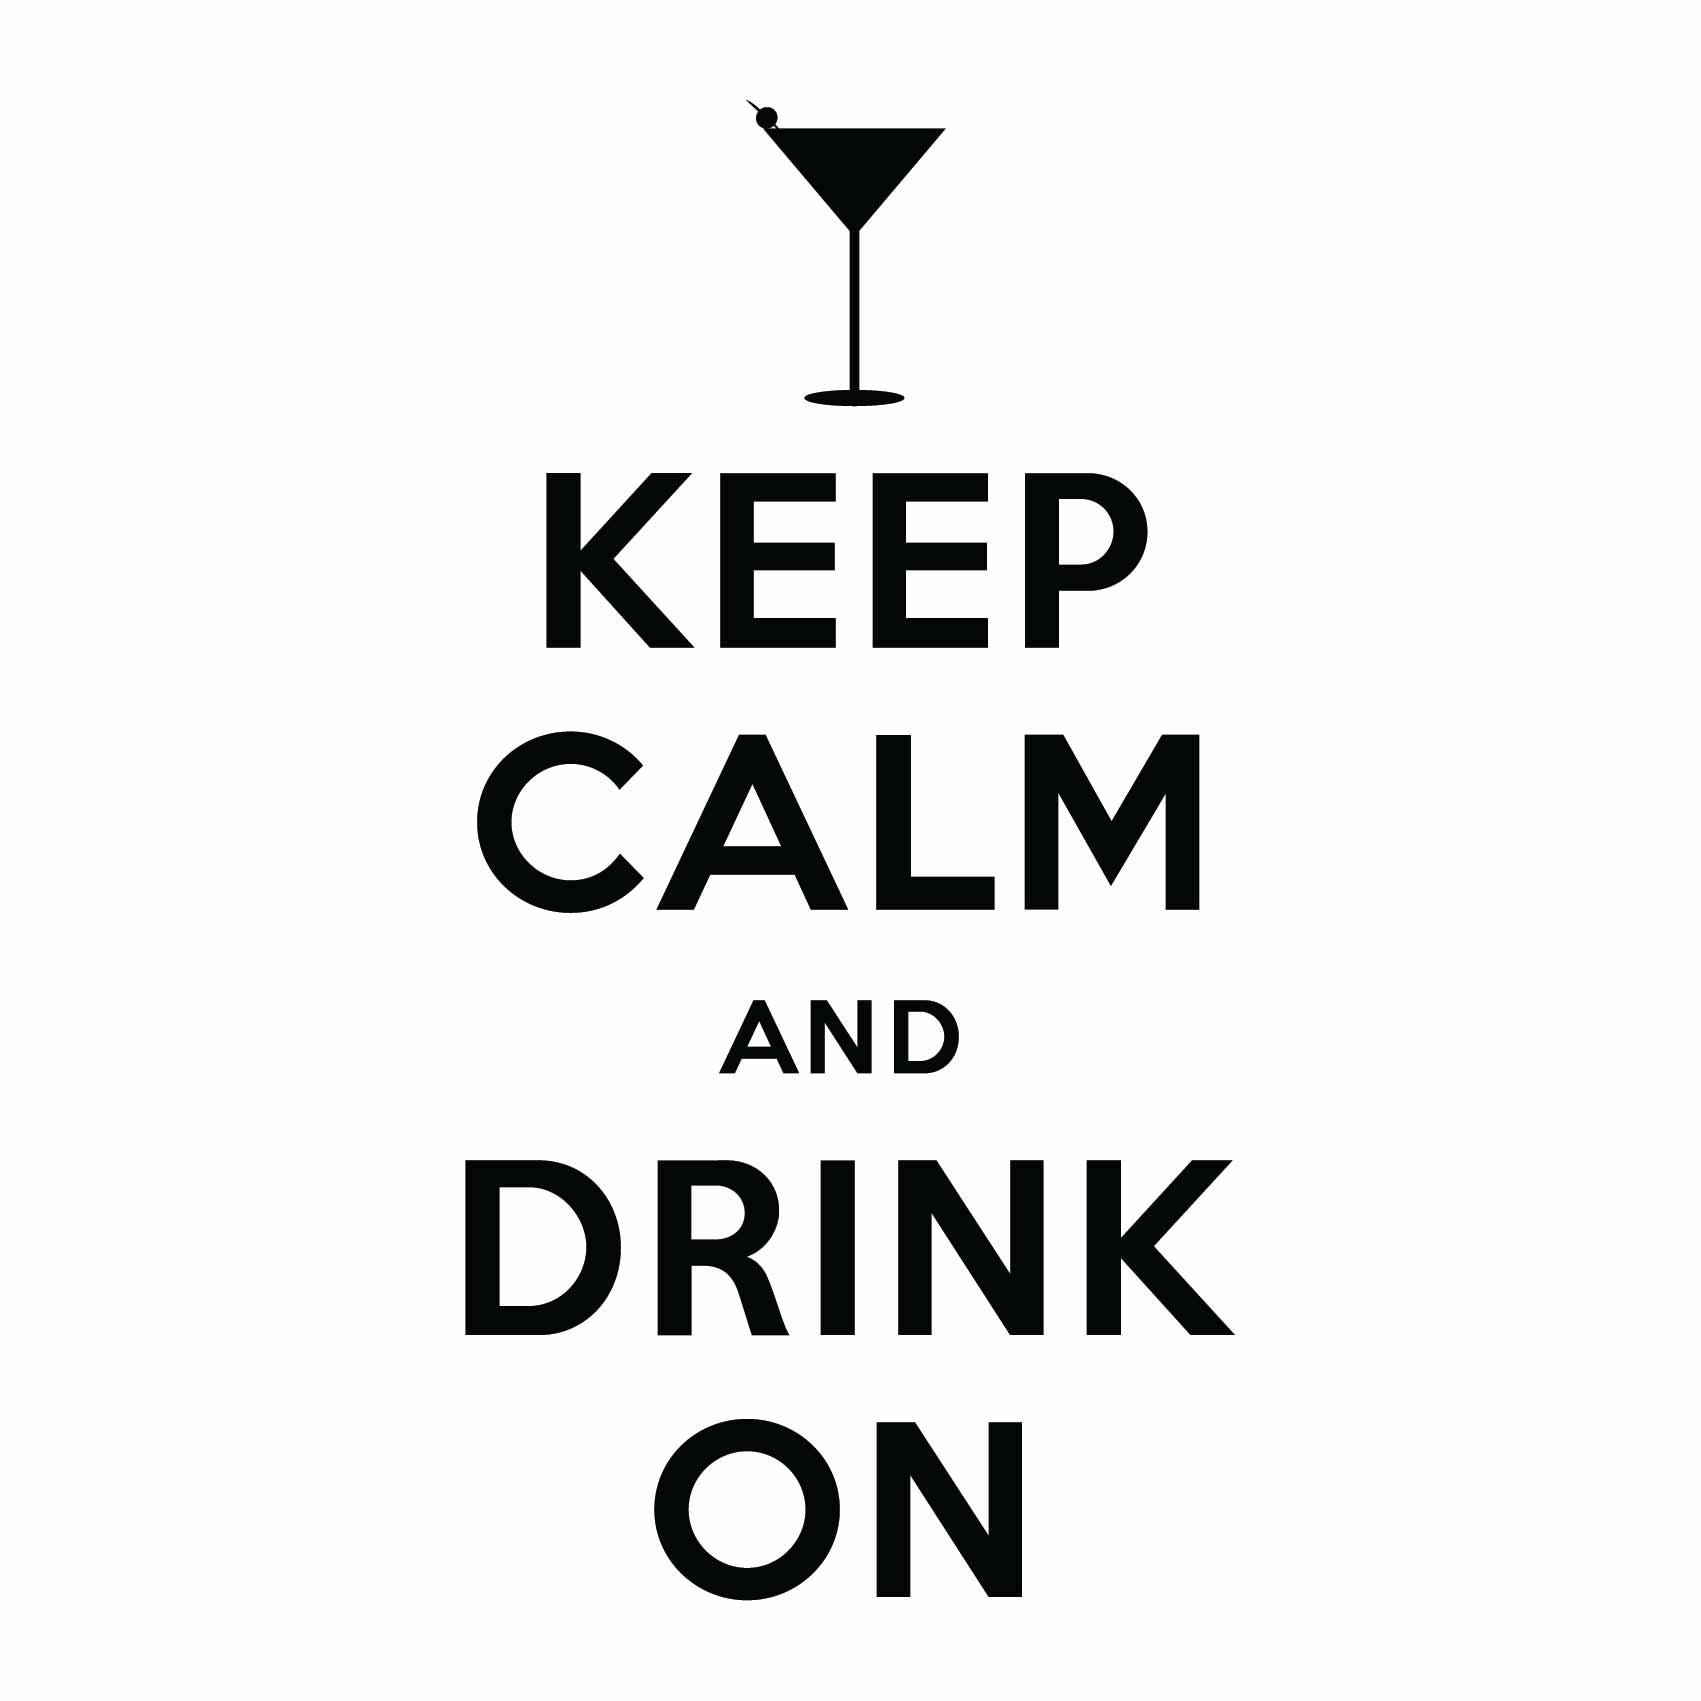 stickers-keep-calm-and-drink-on-ref2alcool-stickers-muraux-cocktail-autocollant-deco-salon-chambre-sticker-mural-alcool-decoration-(2)